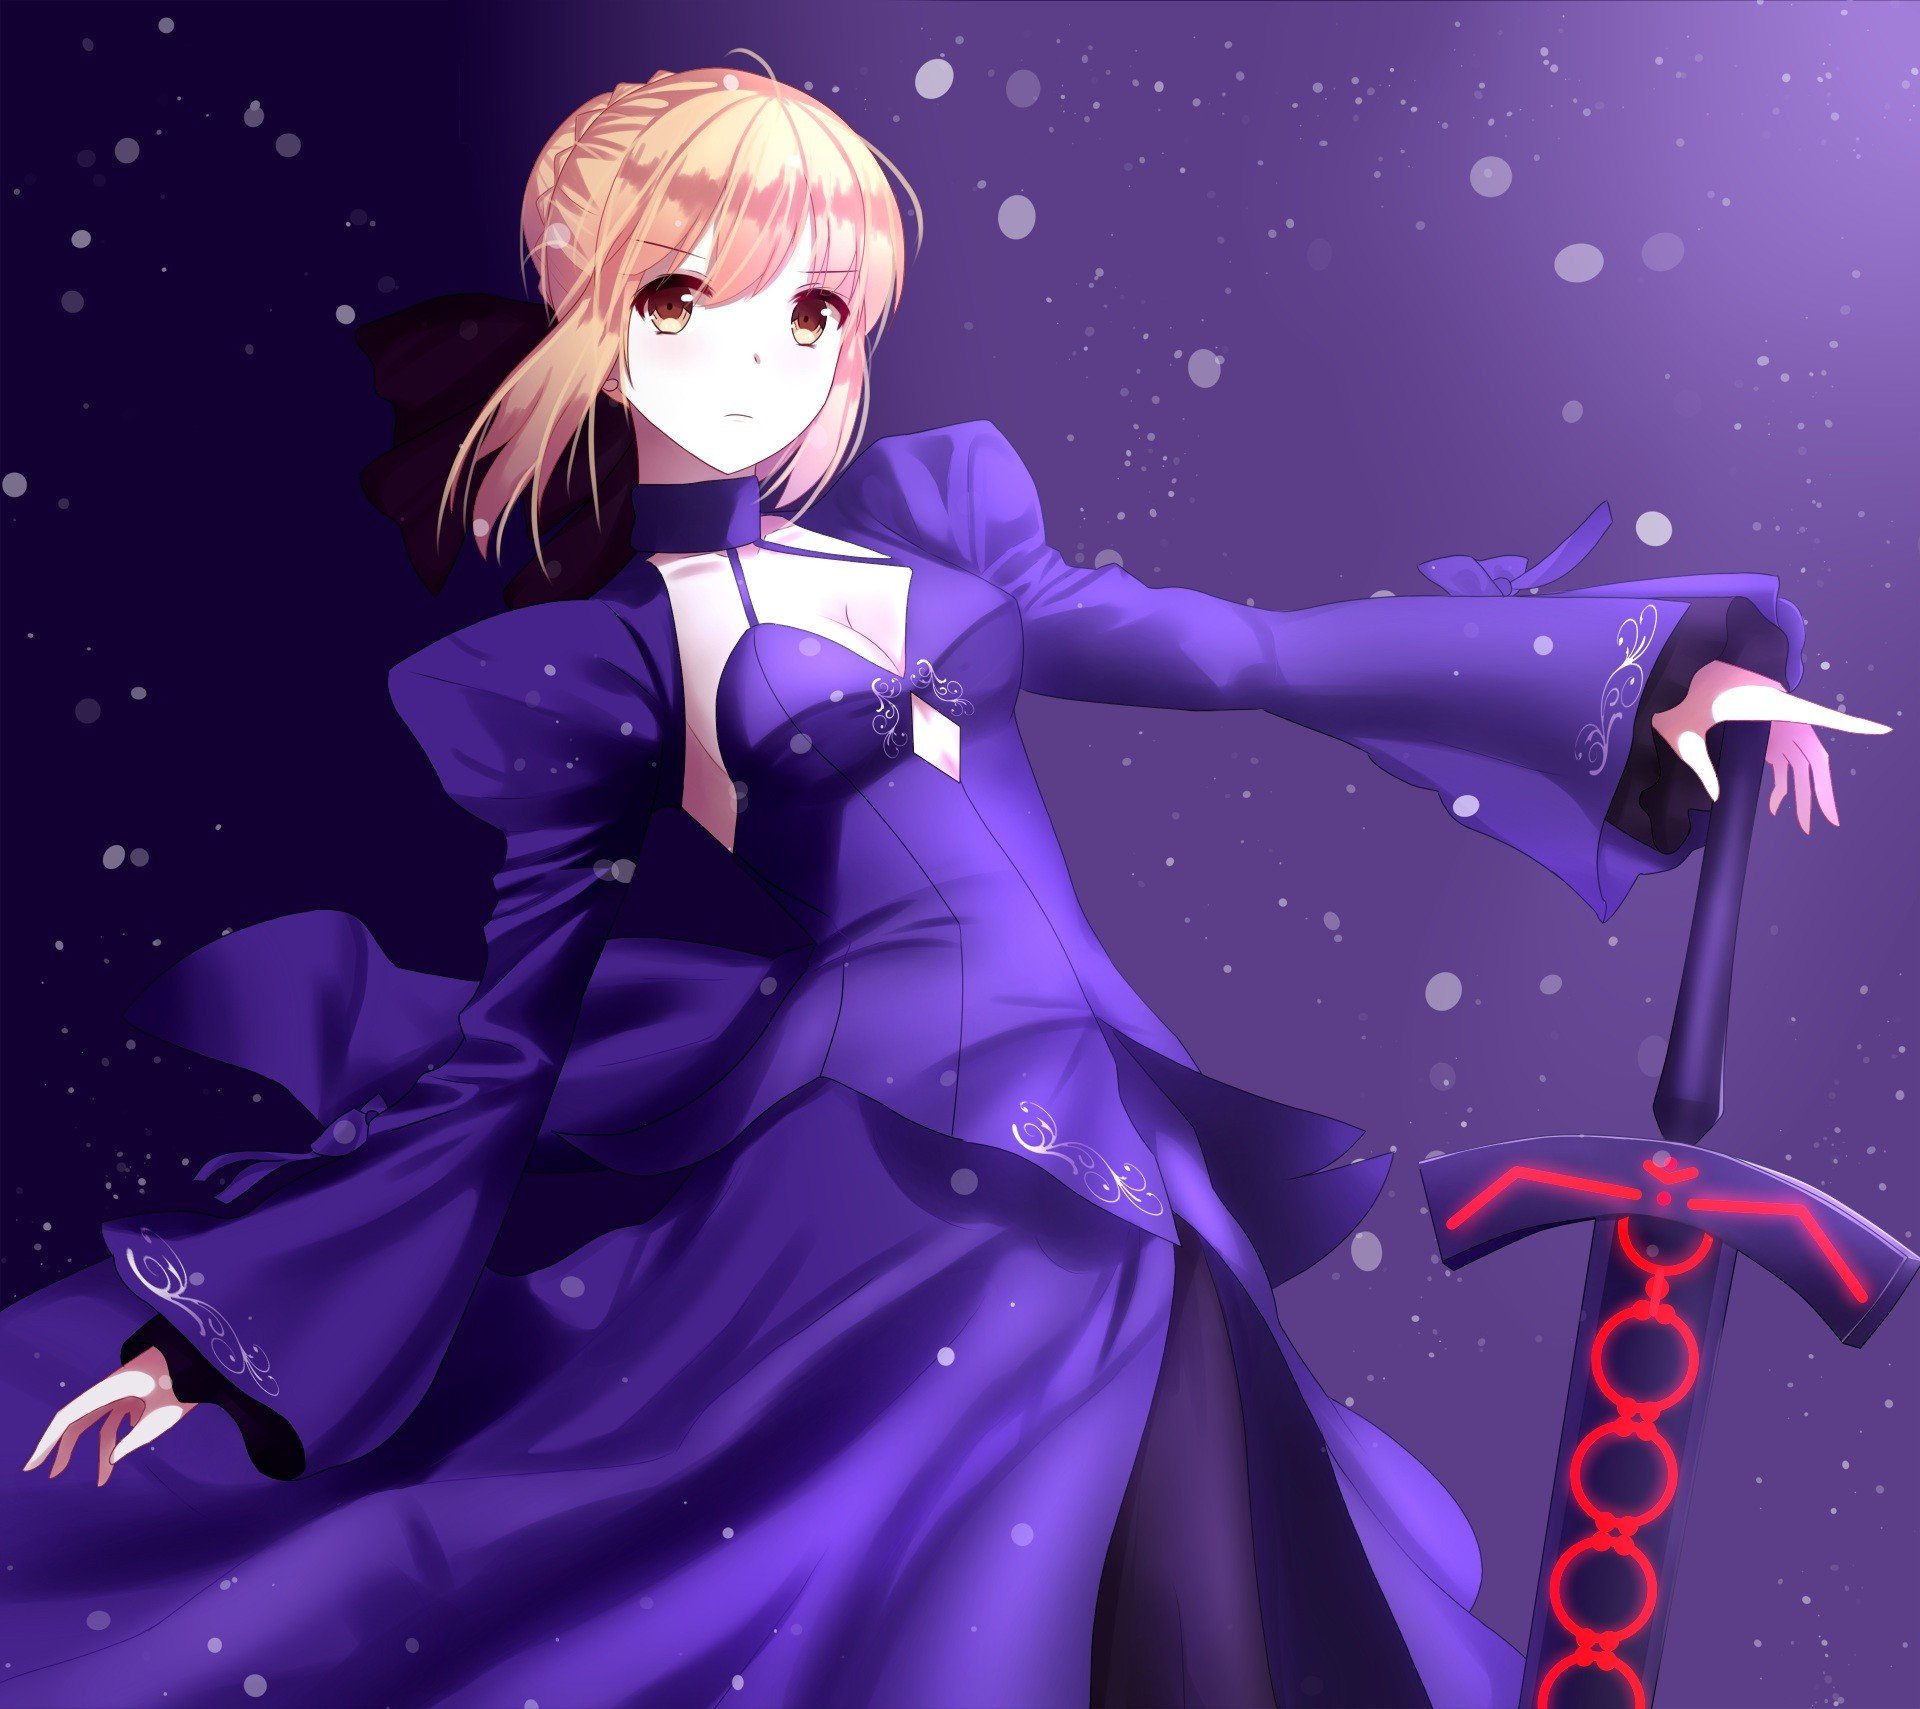 cleavage, Short hair, Blonde, Anime, Anime girls, Fate Stay Night, Saber, Saber Alter, Dress, Sword, Weapon, Open shirt Wallpaper